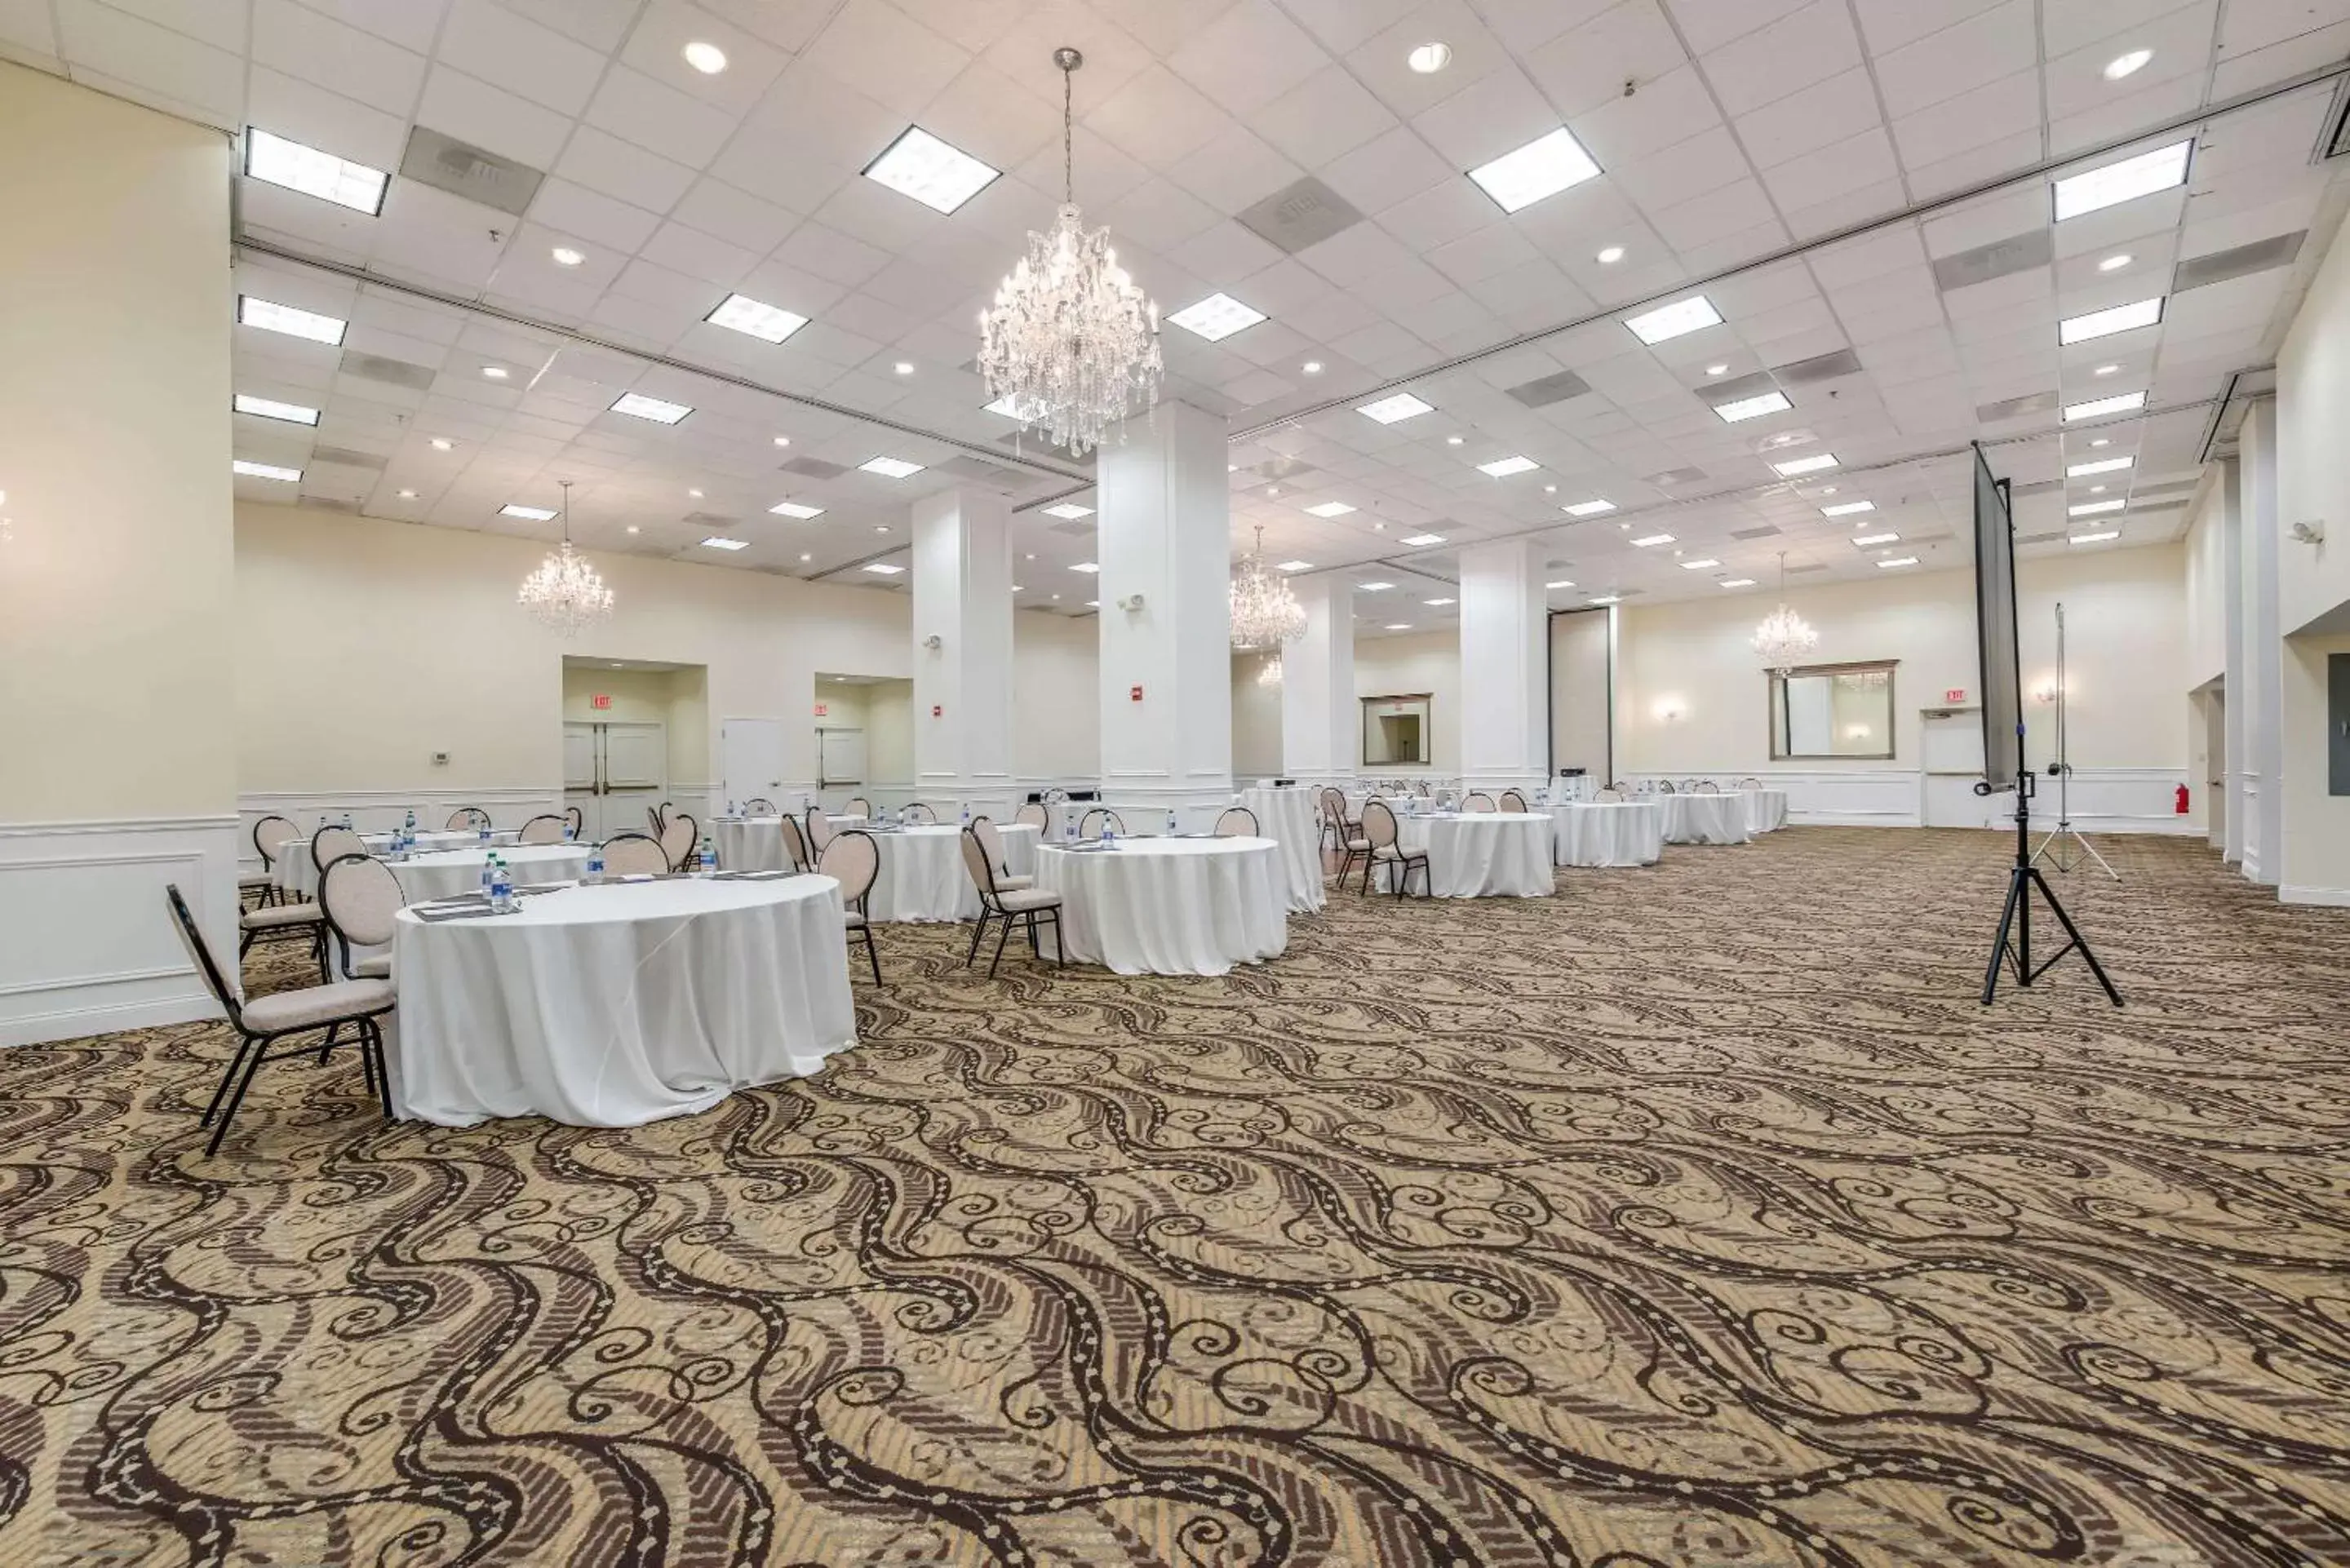 On site, Banquet Facilities in Comfort Suites Chicago O'Hare Airport